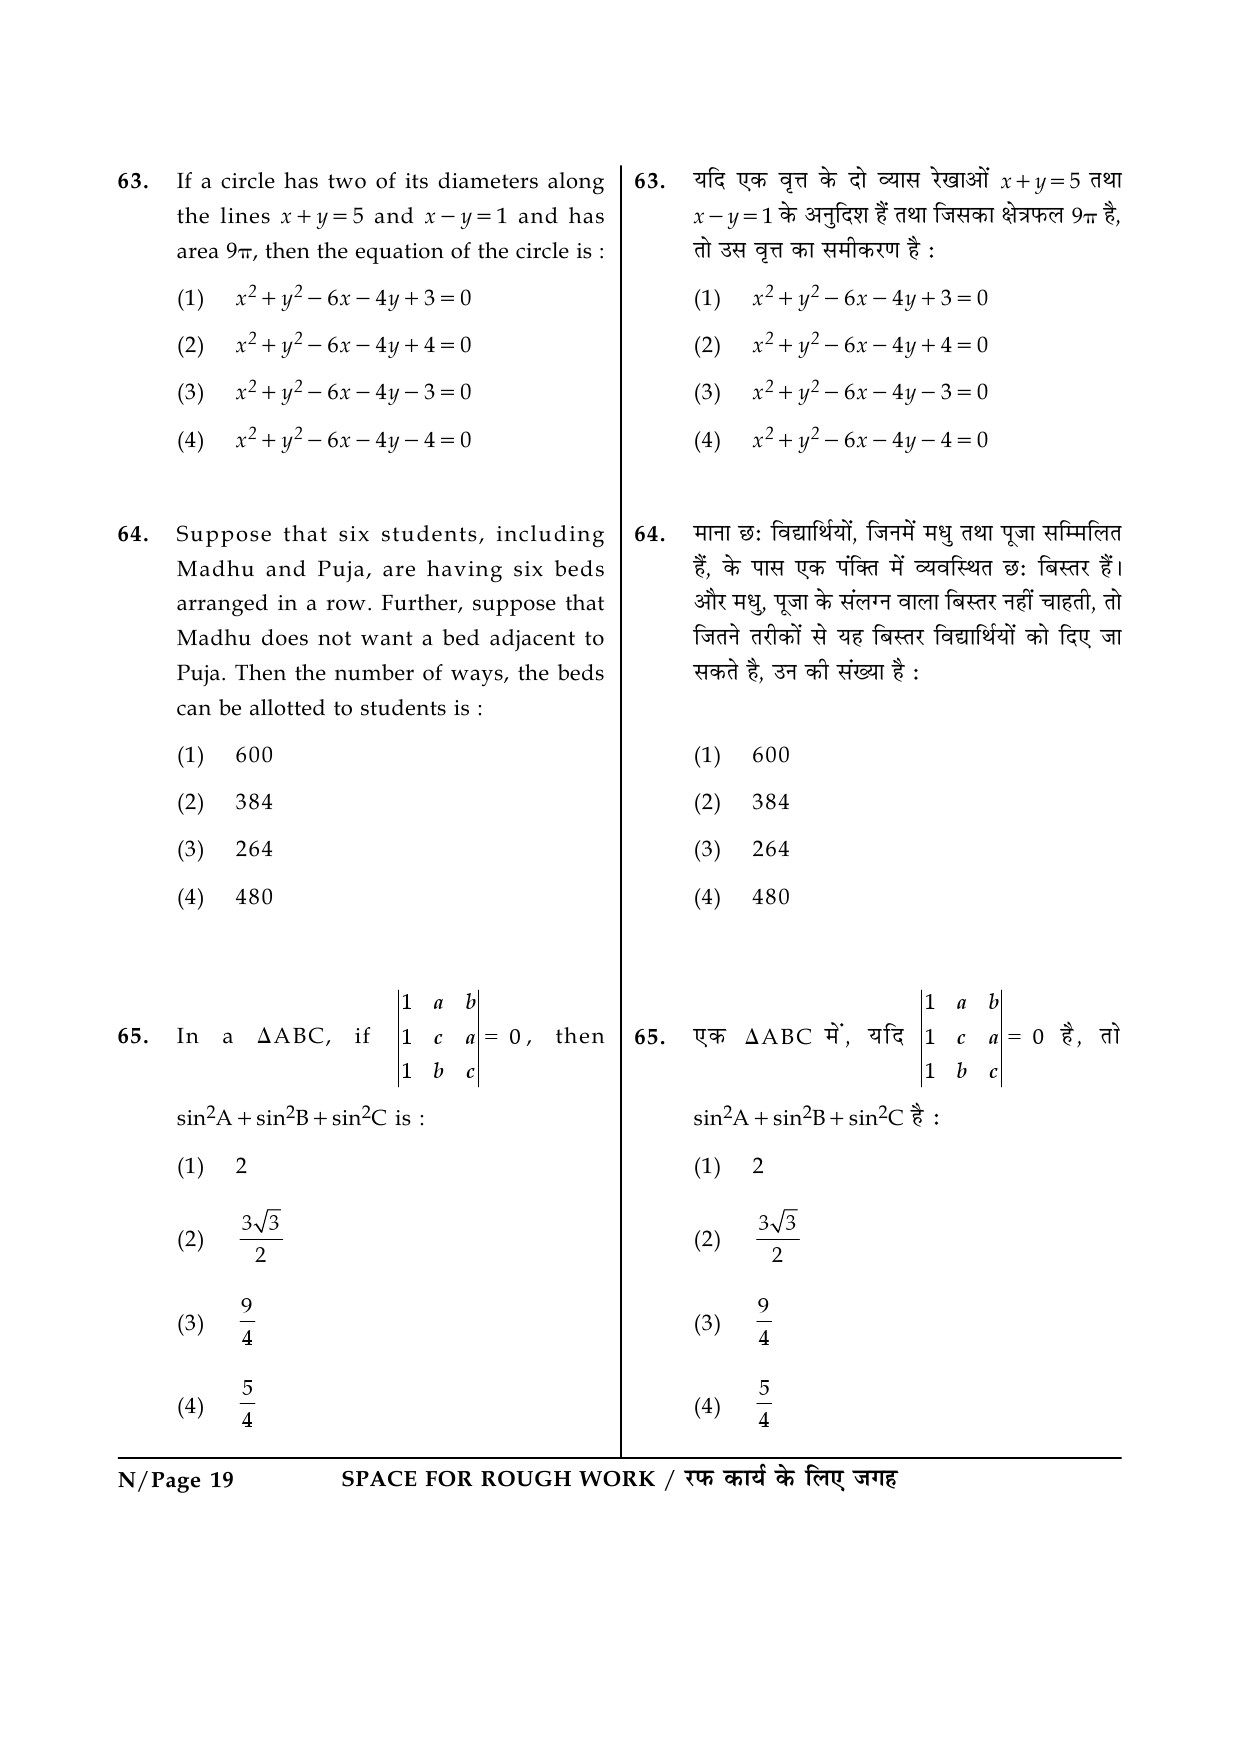 JEE Main Exam Question Paper 2015 Booklet N 19